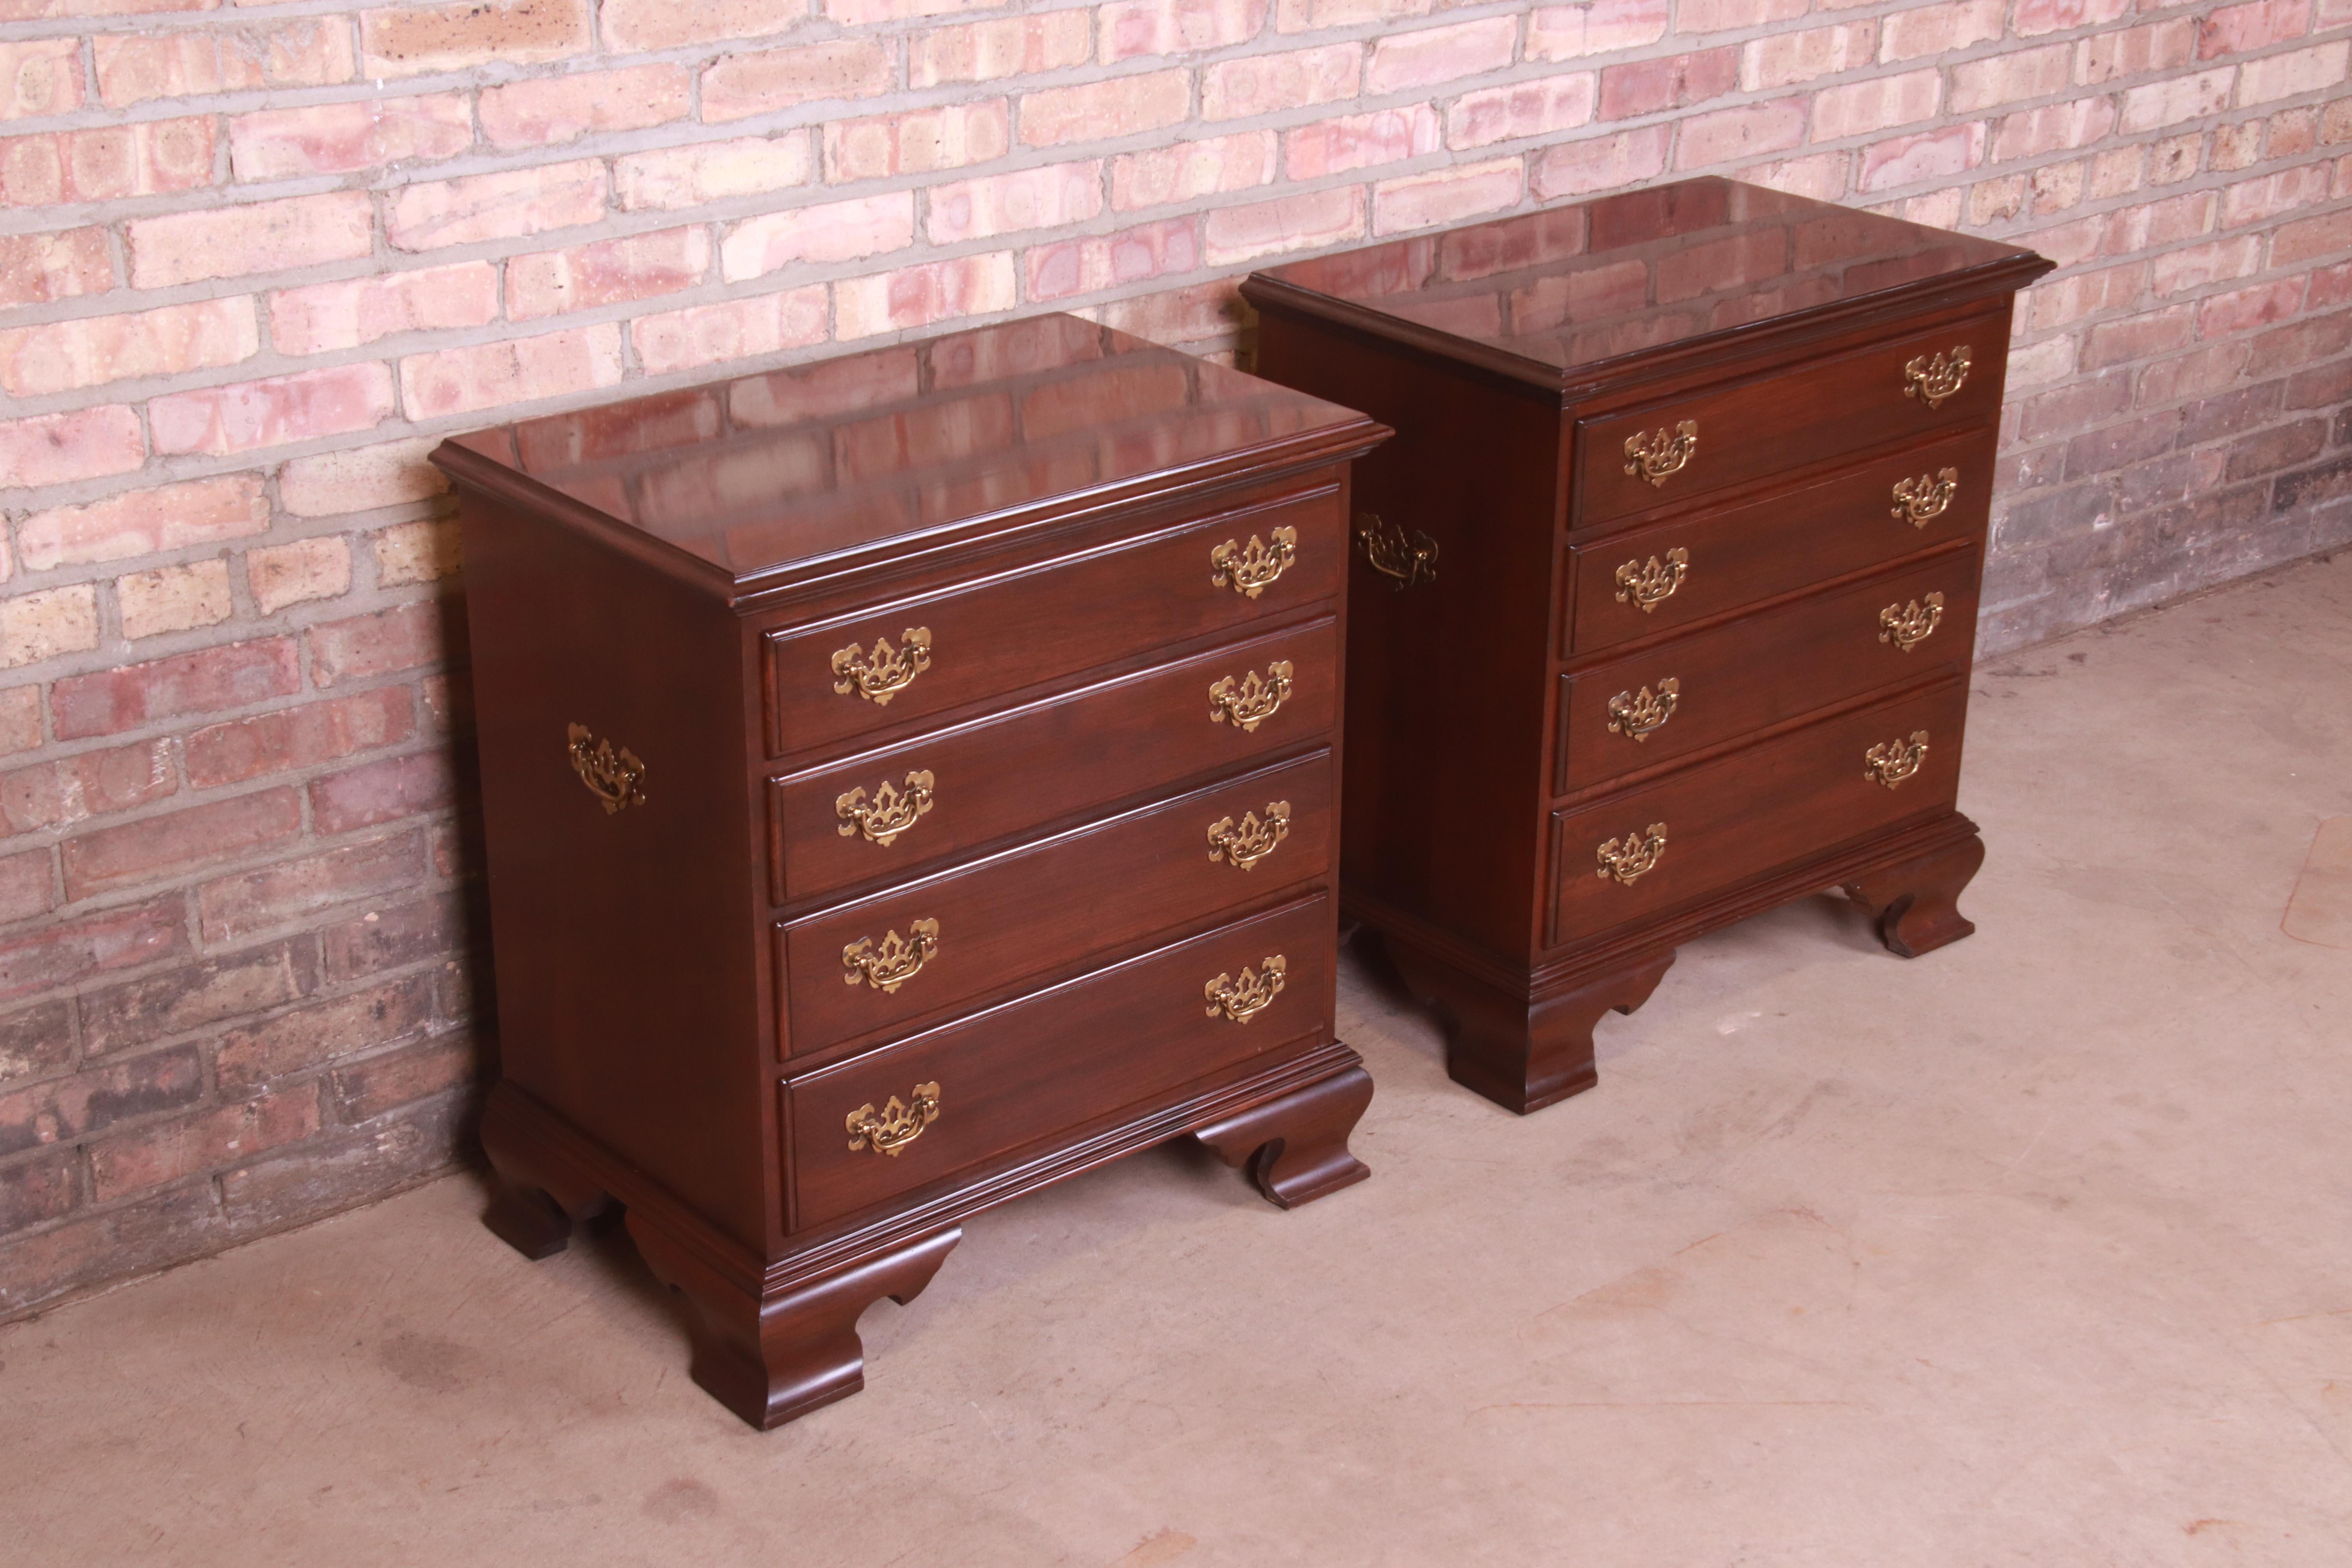 Ethan Allen Georgian Mahogany Four-Drawer Bedside Chests, Pair 1